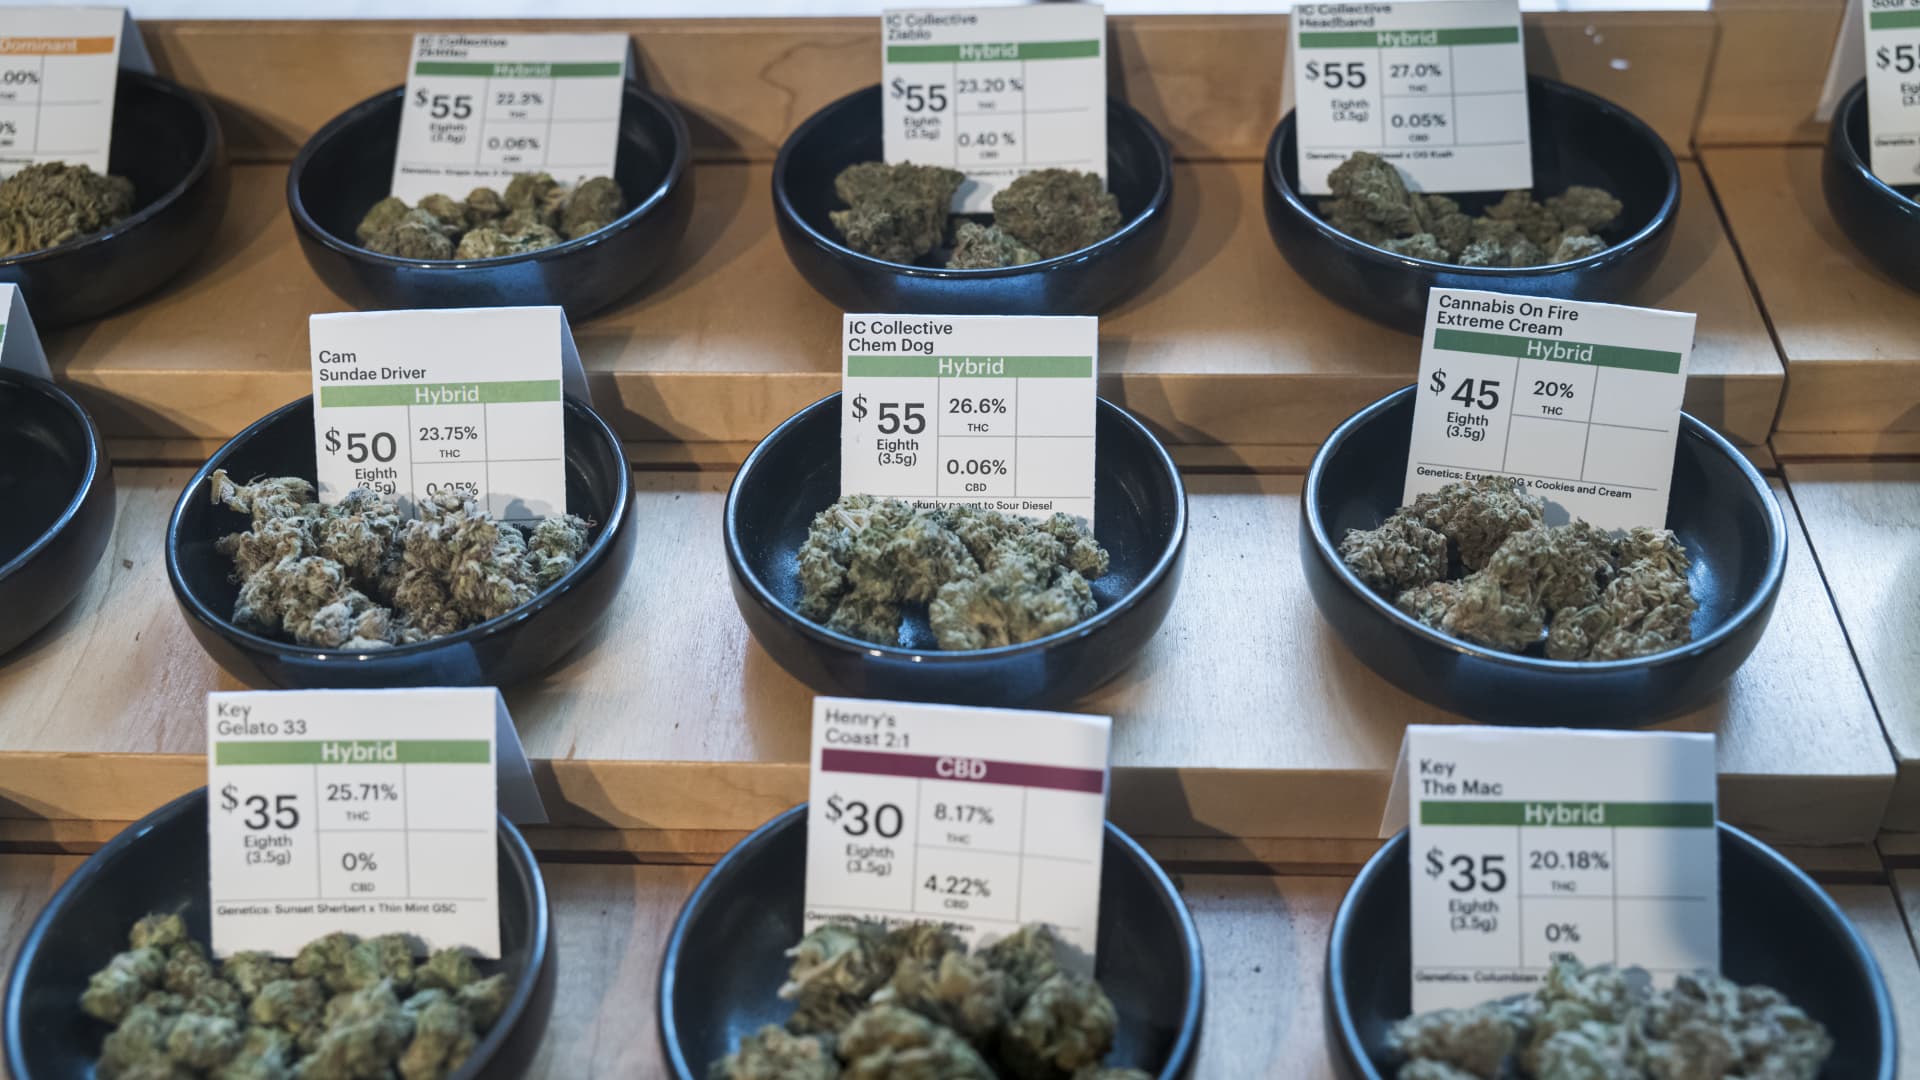 Different strains of cannabis are displayed for sale at the Harborside dispensary in Oakland, California, U.S., on Monday, March 23, 2020.